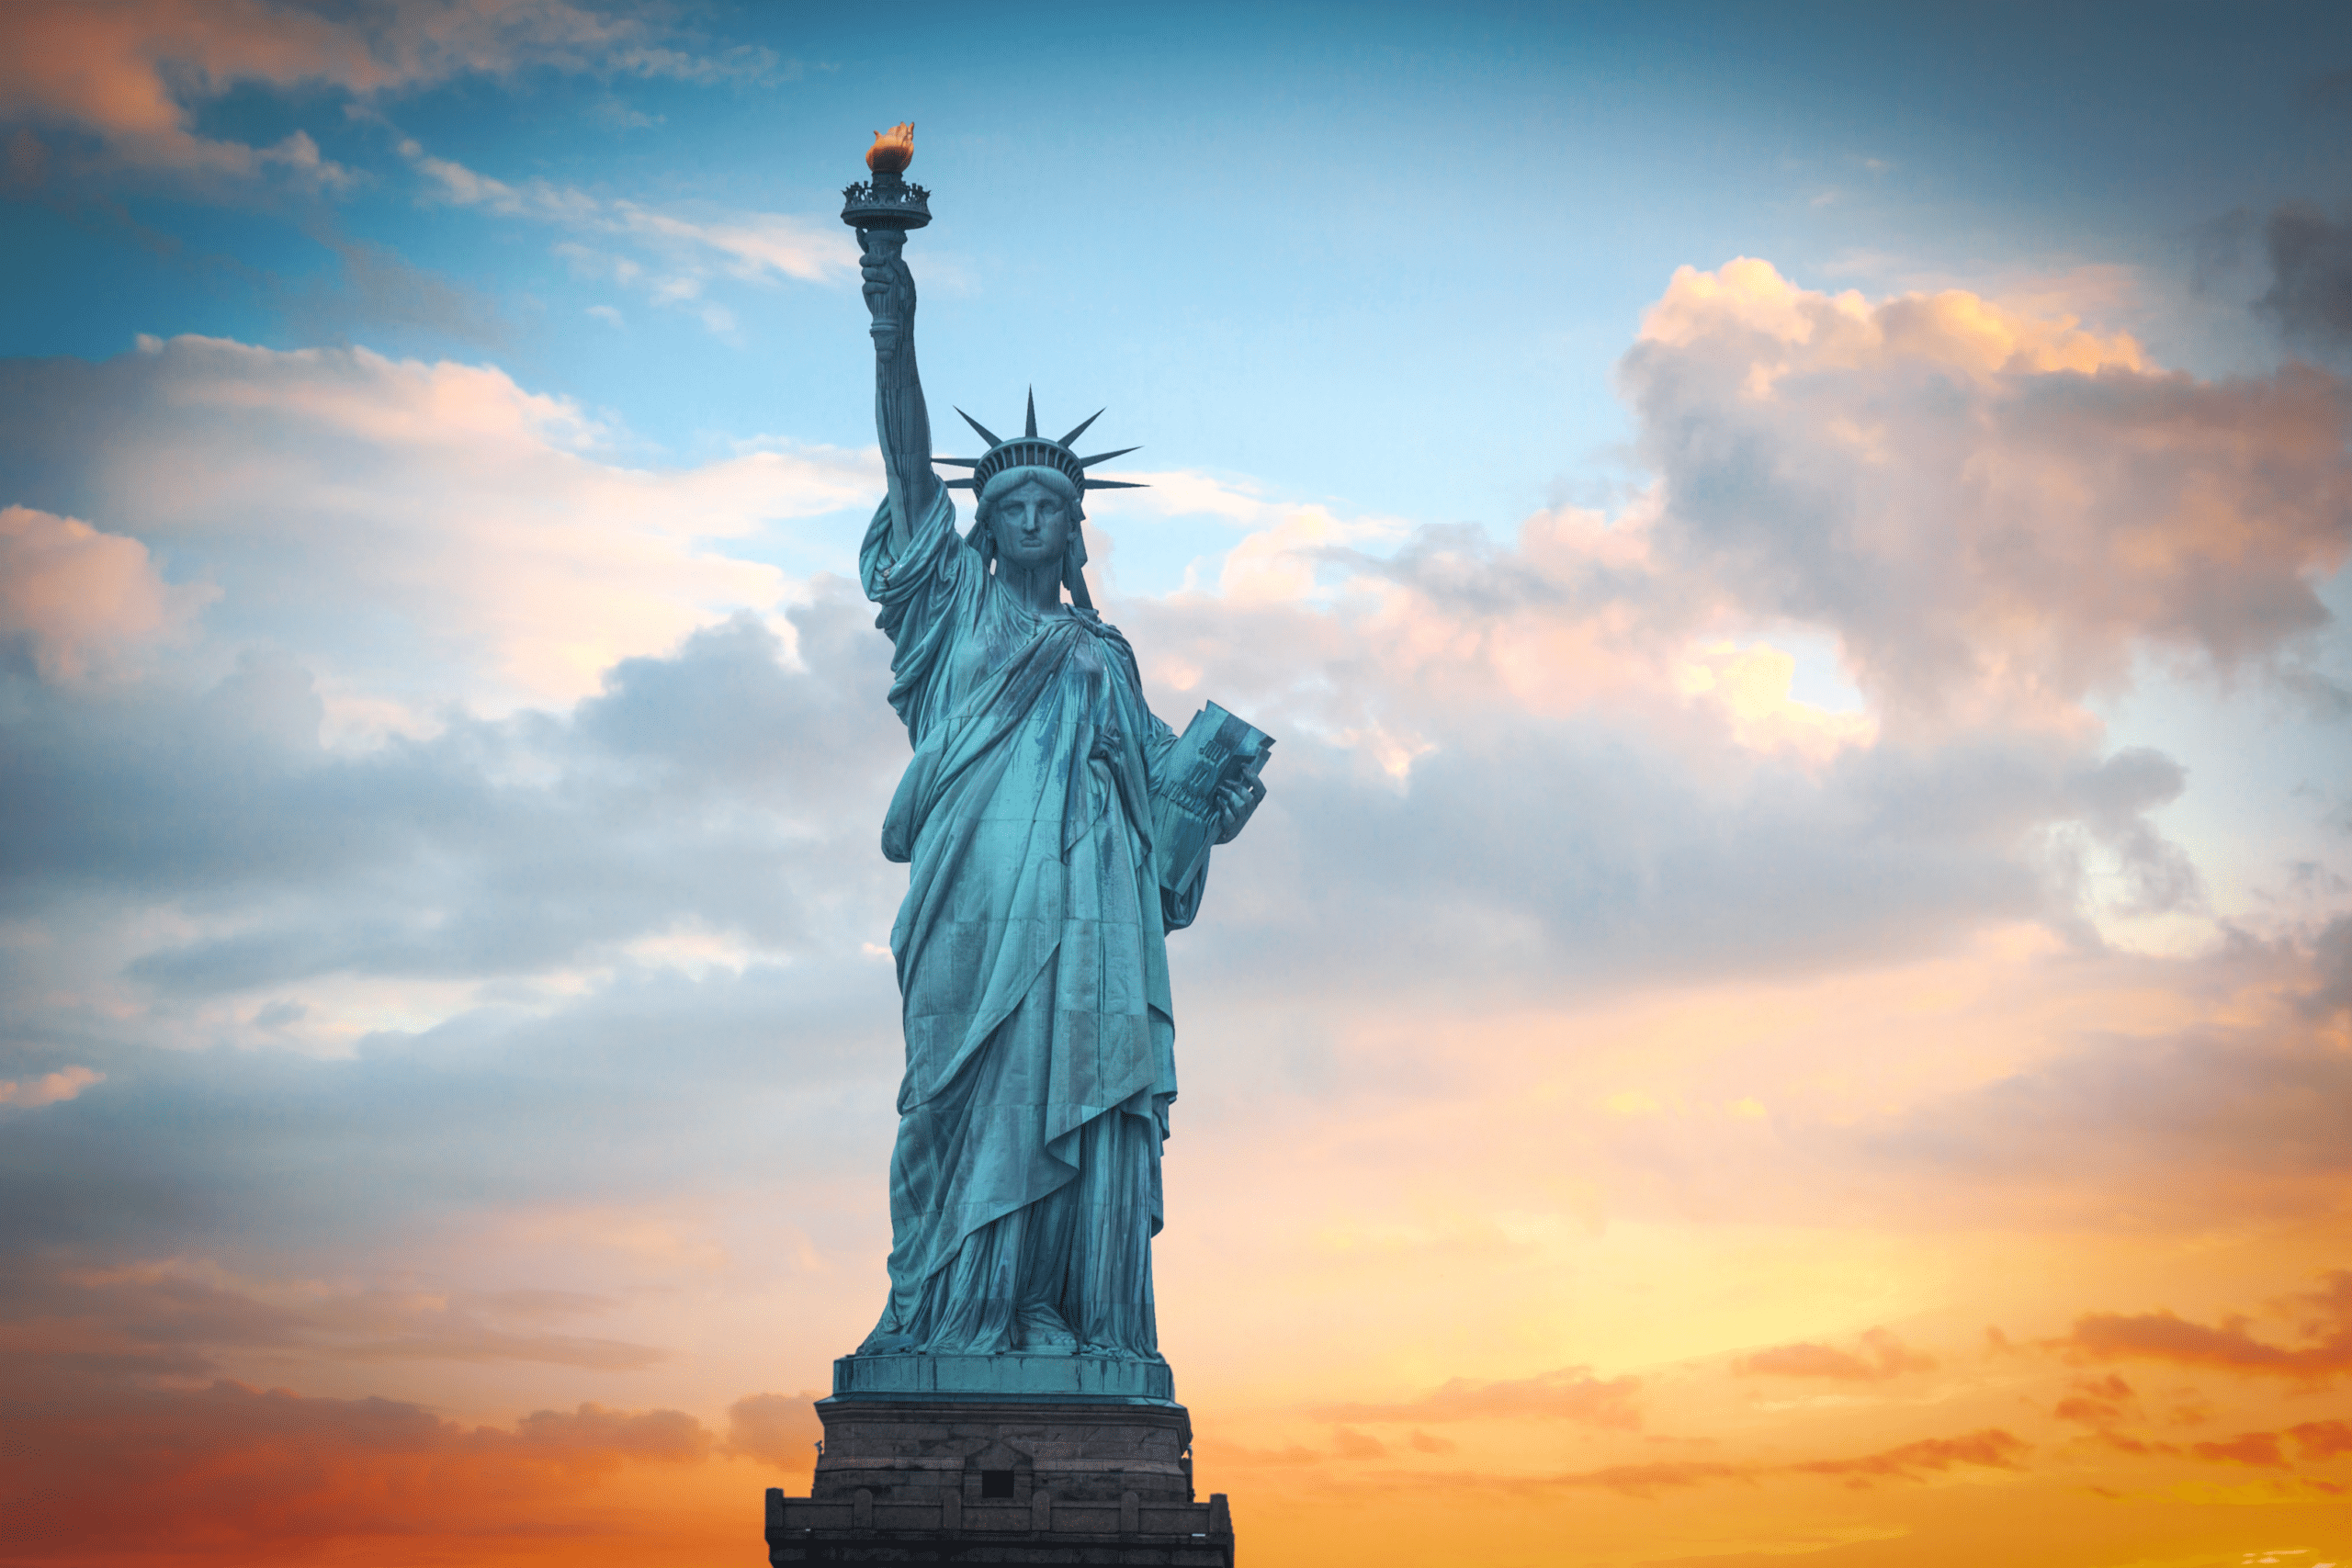 An image of the Statue of Liberty, one of the most iconic Fourth of July locations in the United States.